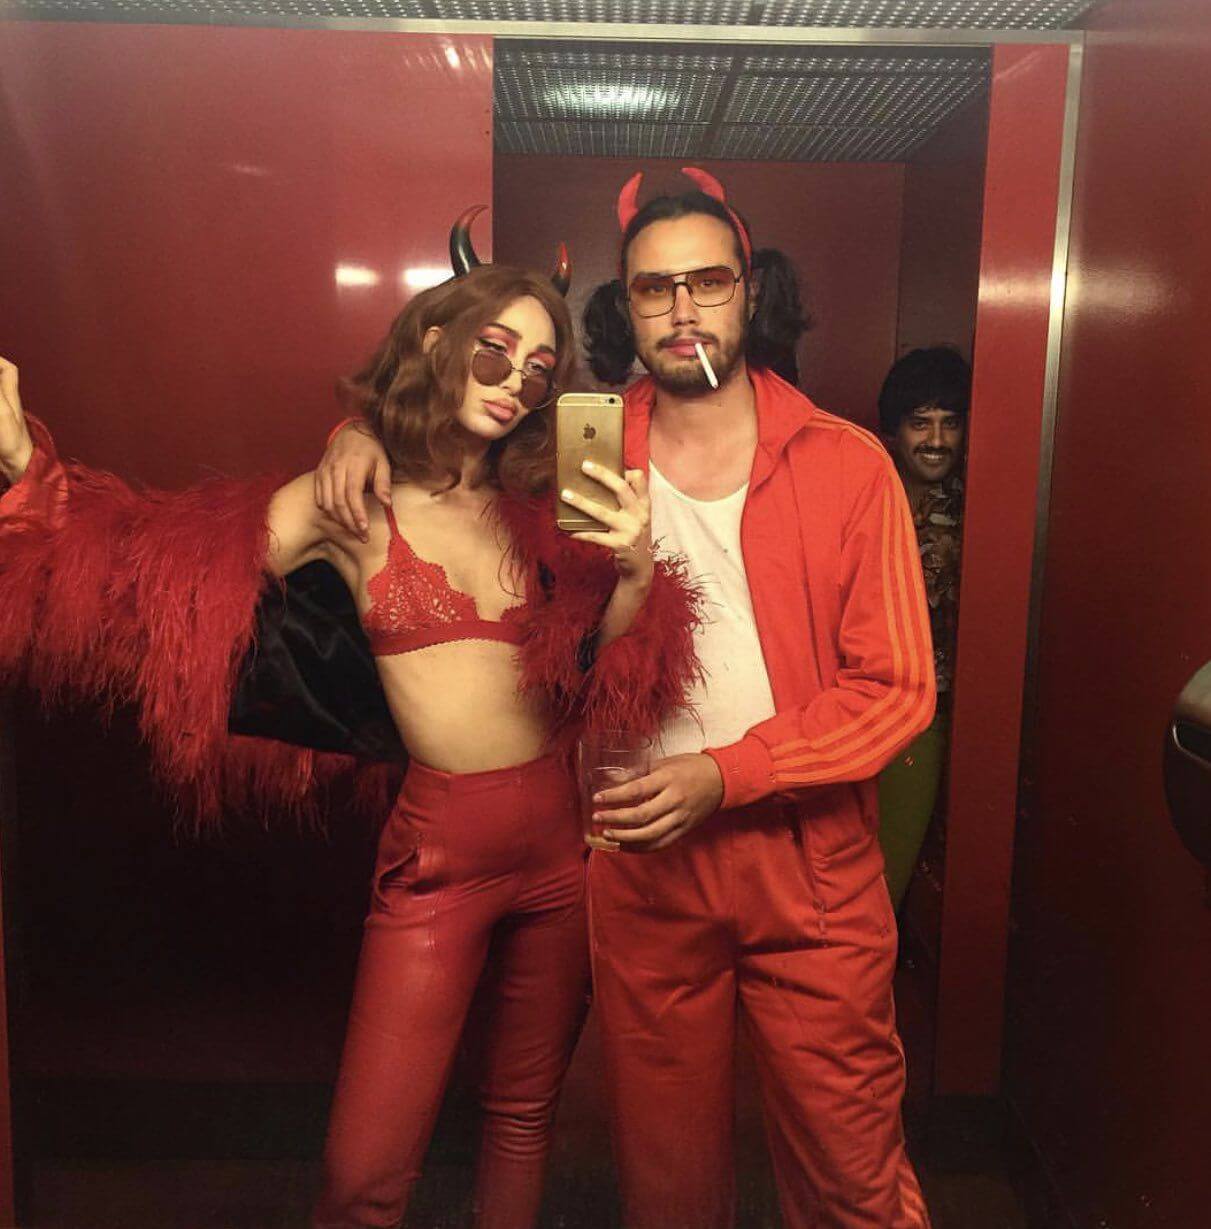 Halloween tumblr goals costumes sexy red outfit